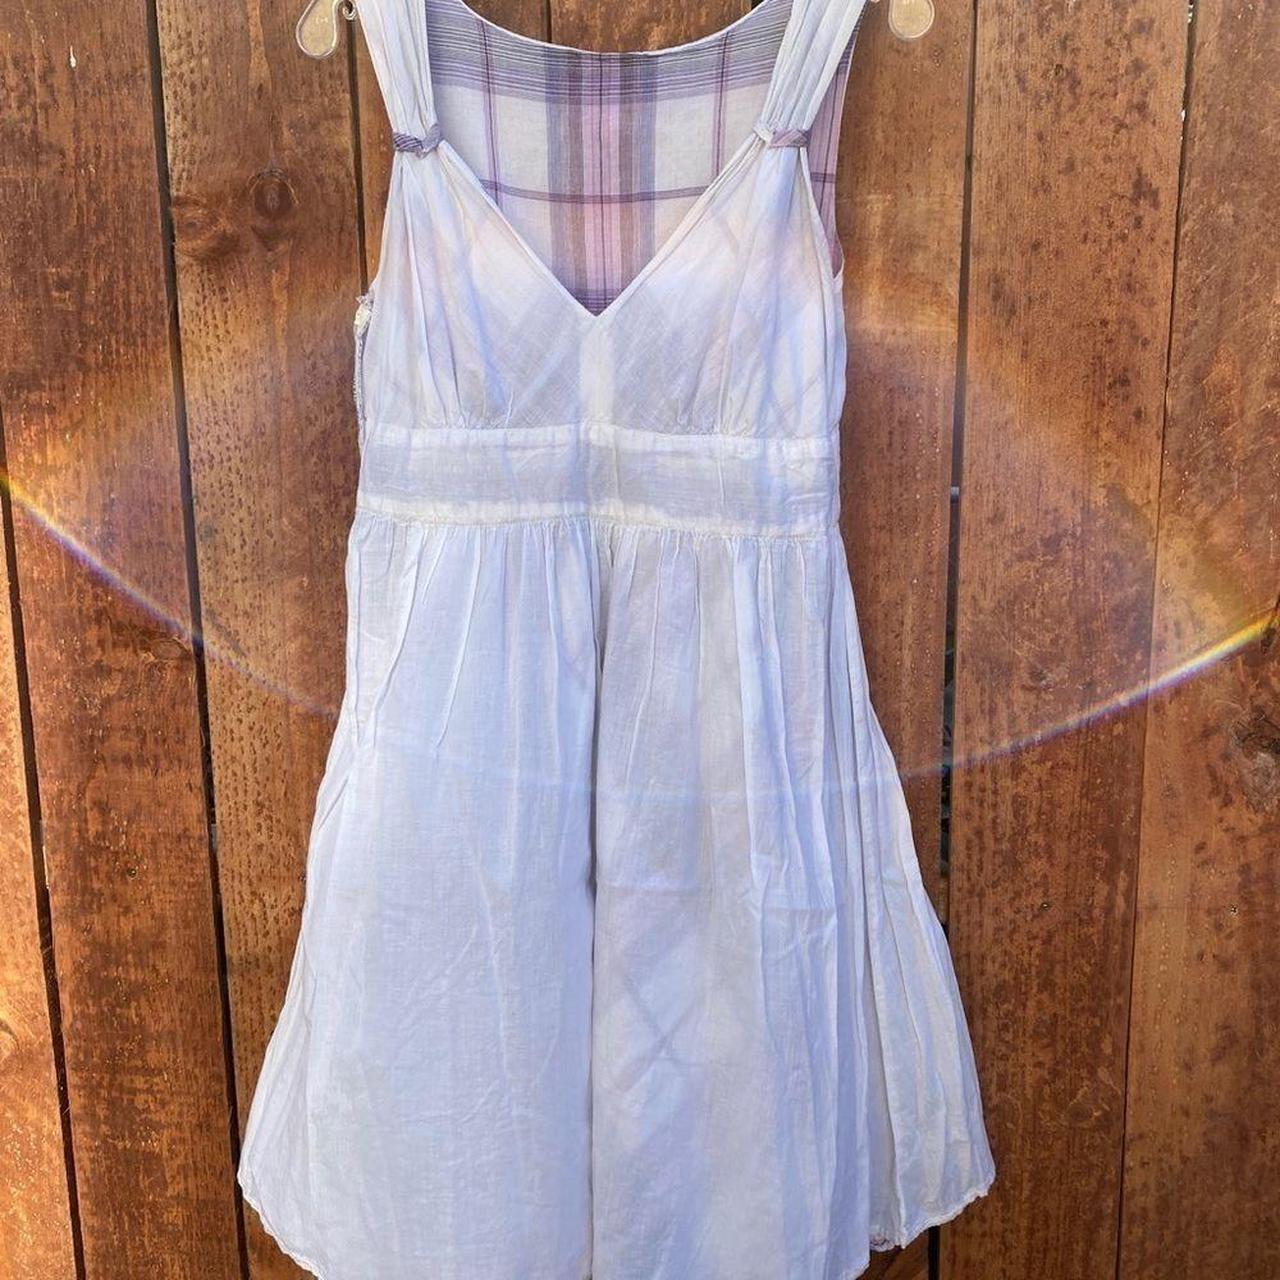 Product Image 2 - Converse One Star Dress, Size